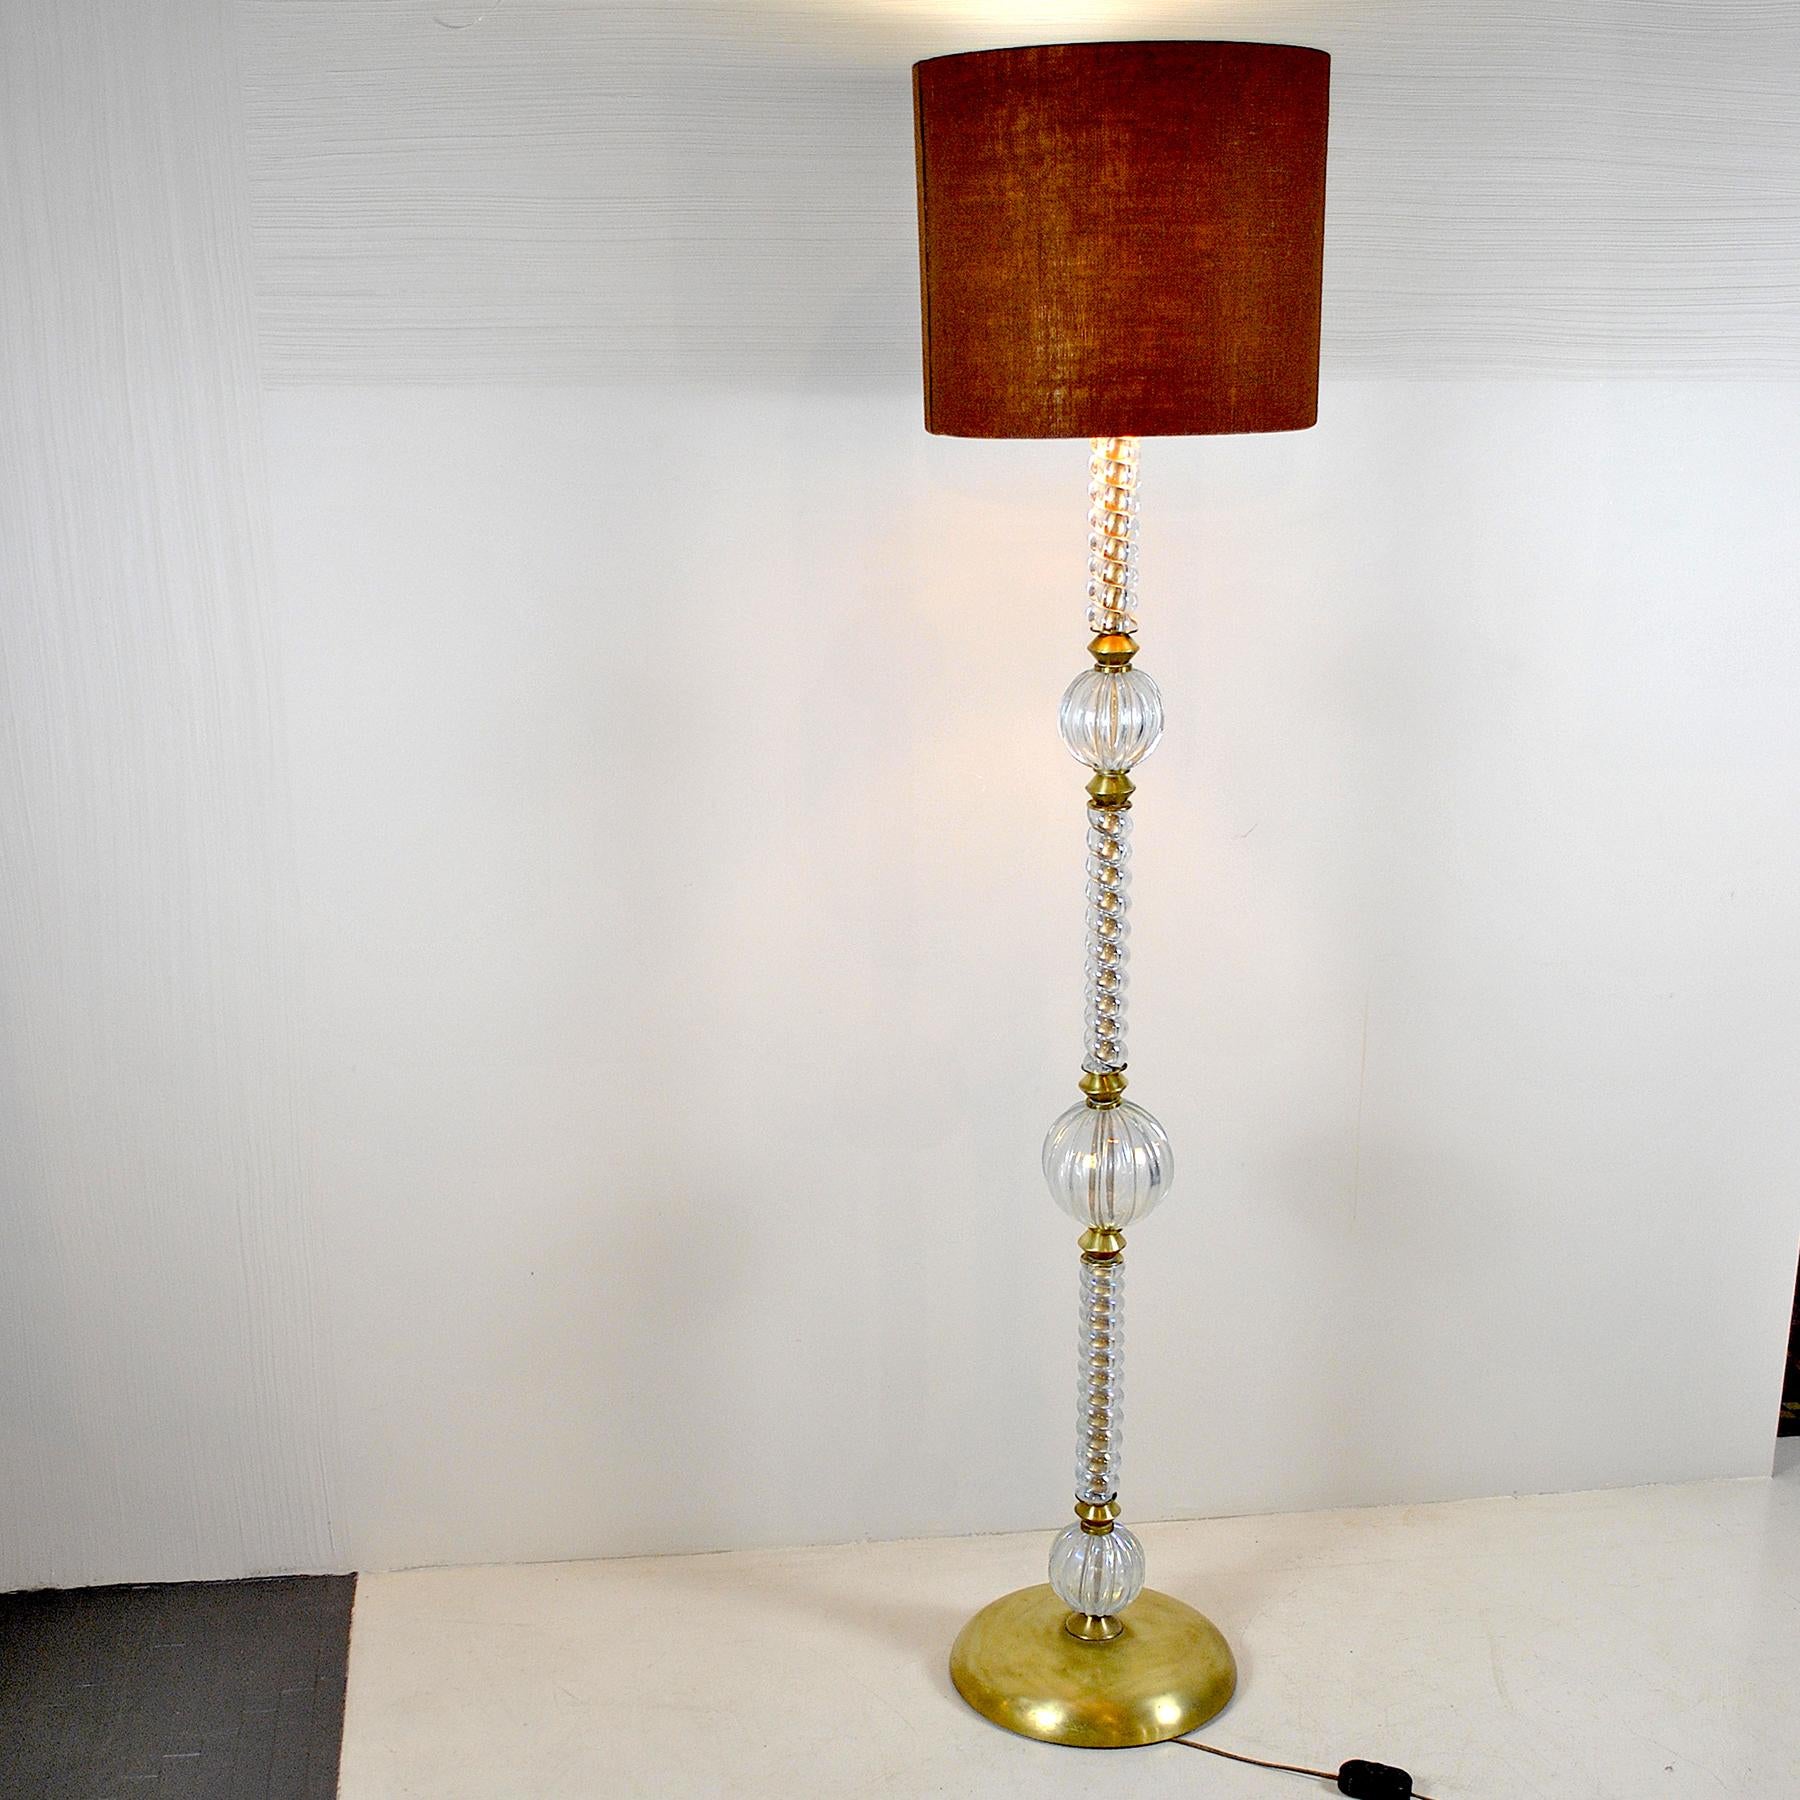 Italian Midcentury Floor Lamp by Barovier & Toso For Sale 6